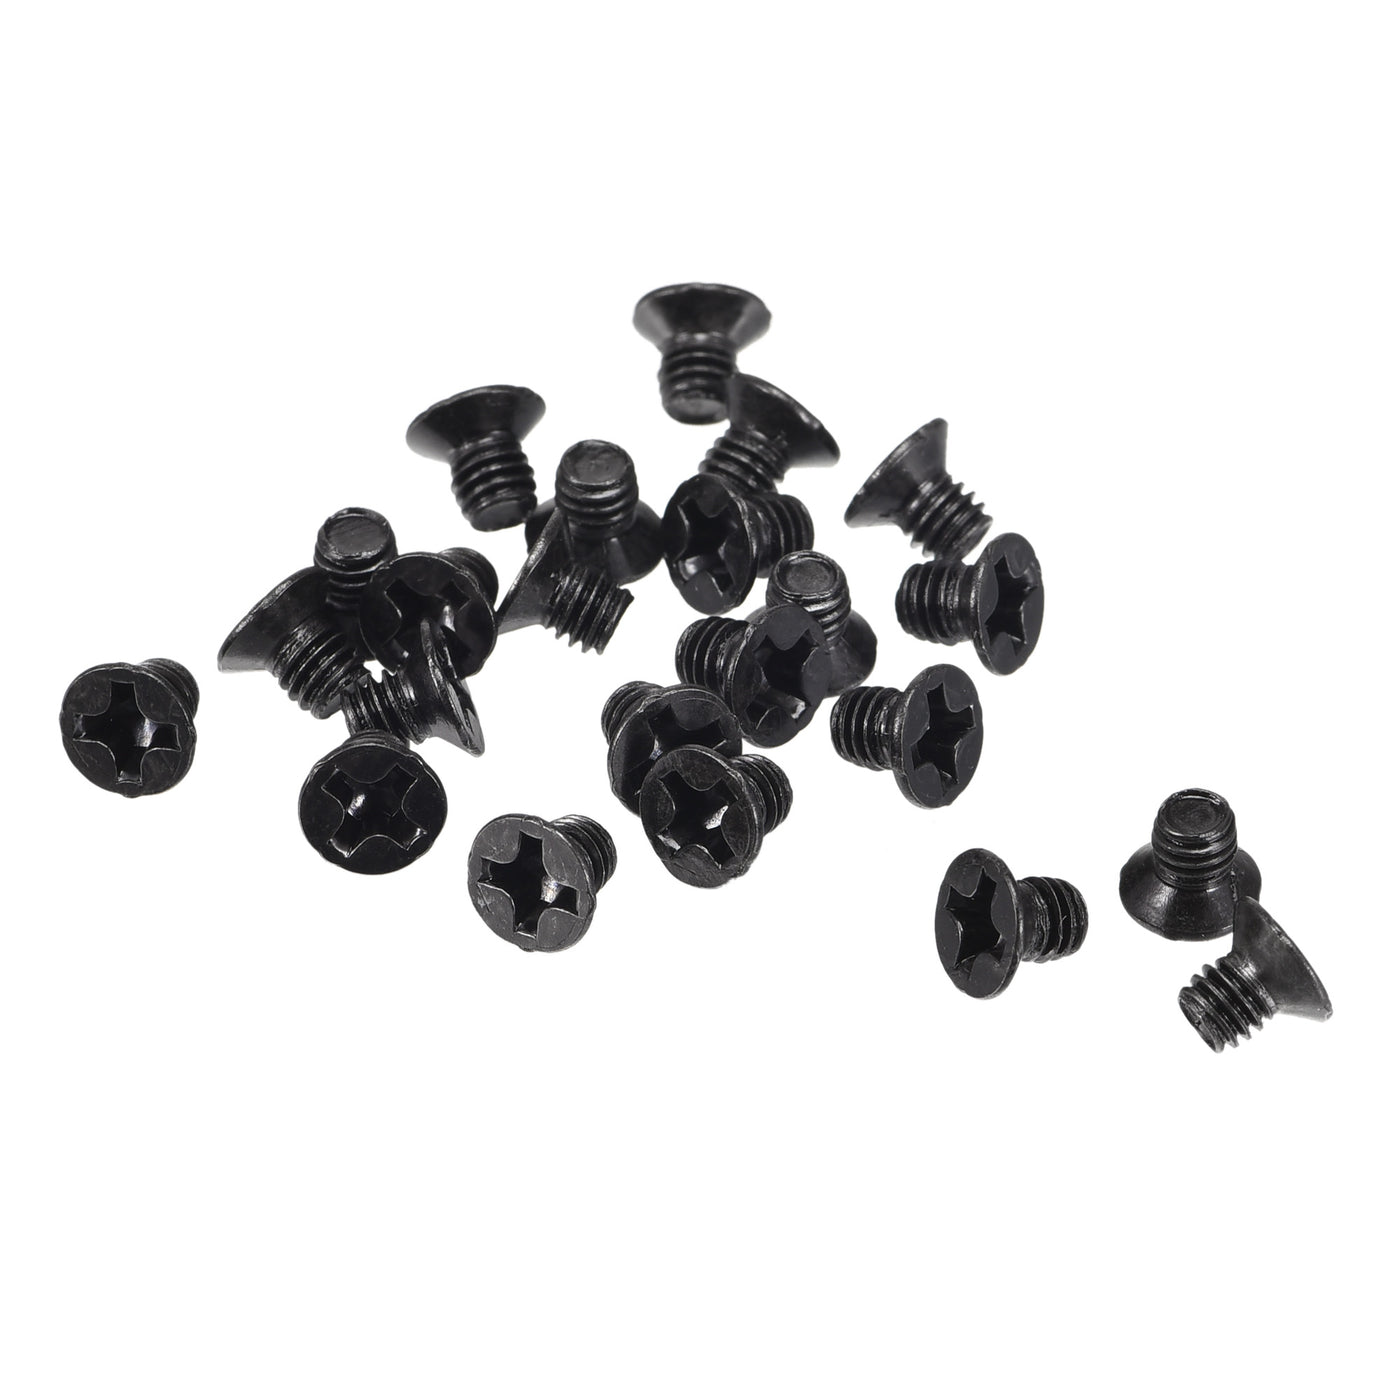 Uxcell Uxcell M3 x 14mm Phillips Flat Head Screws Carbon Steel Machine Screws Black for Home Office Computer Case Appliance Equipment 350pcs